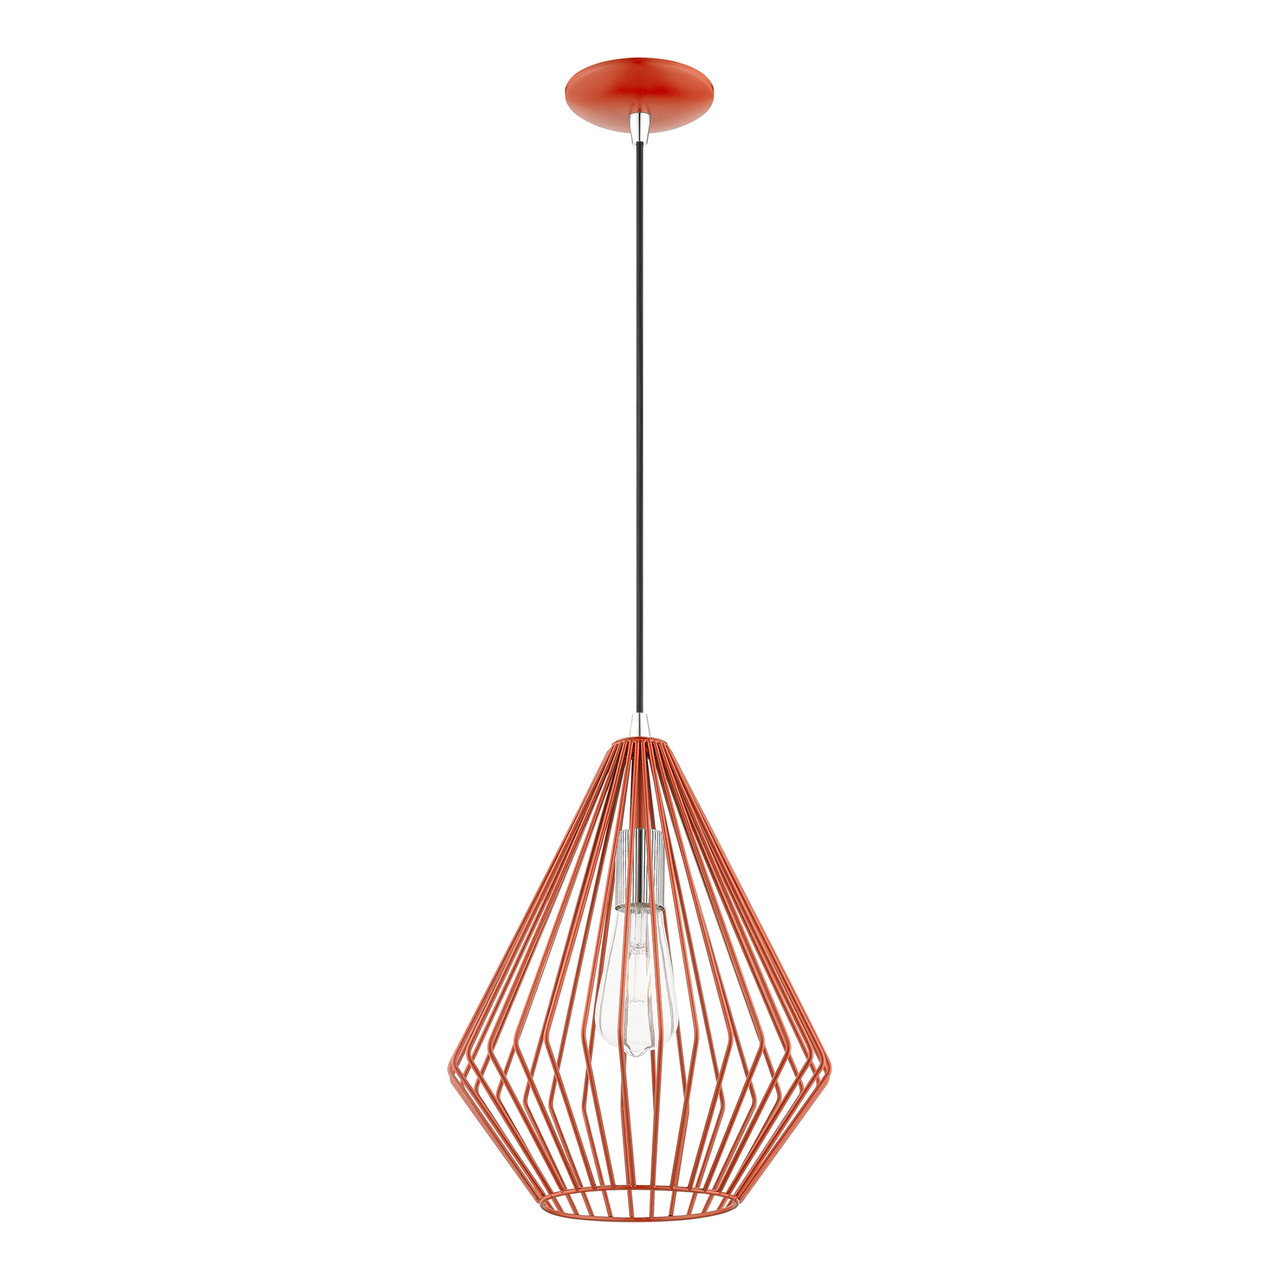 LIVEX LIGHTING 41325-72 1 Light Shiny Red with Polished Chrome Accents Pendant